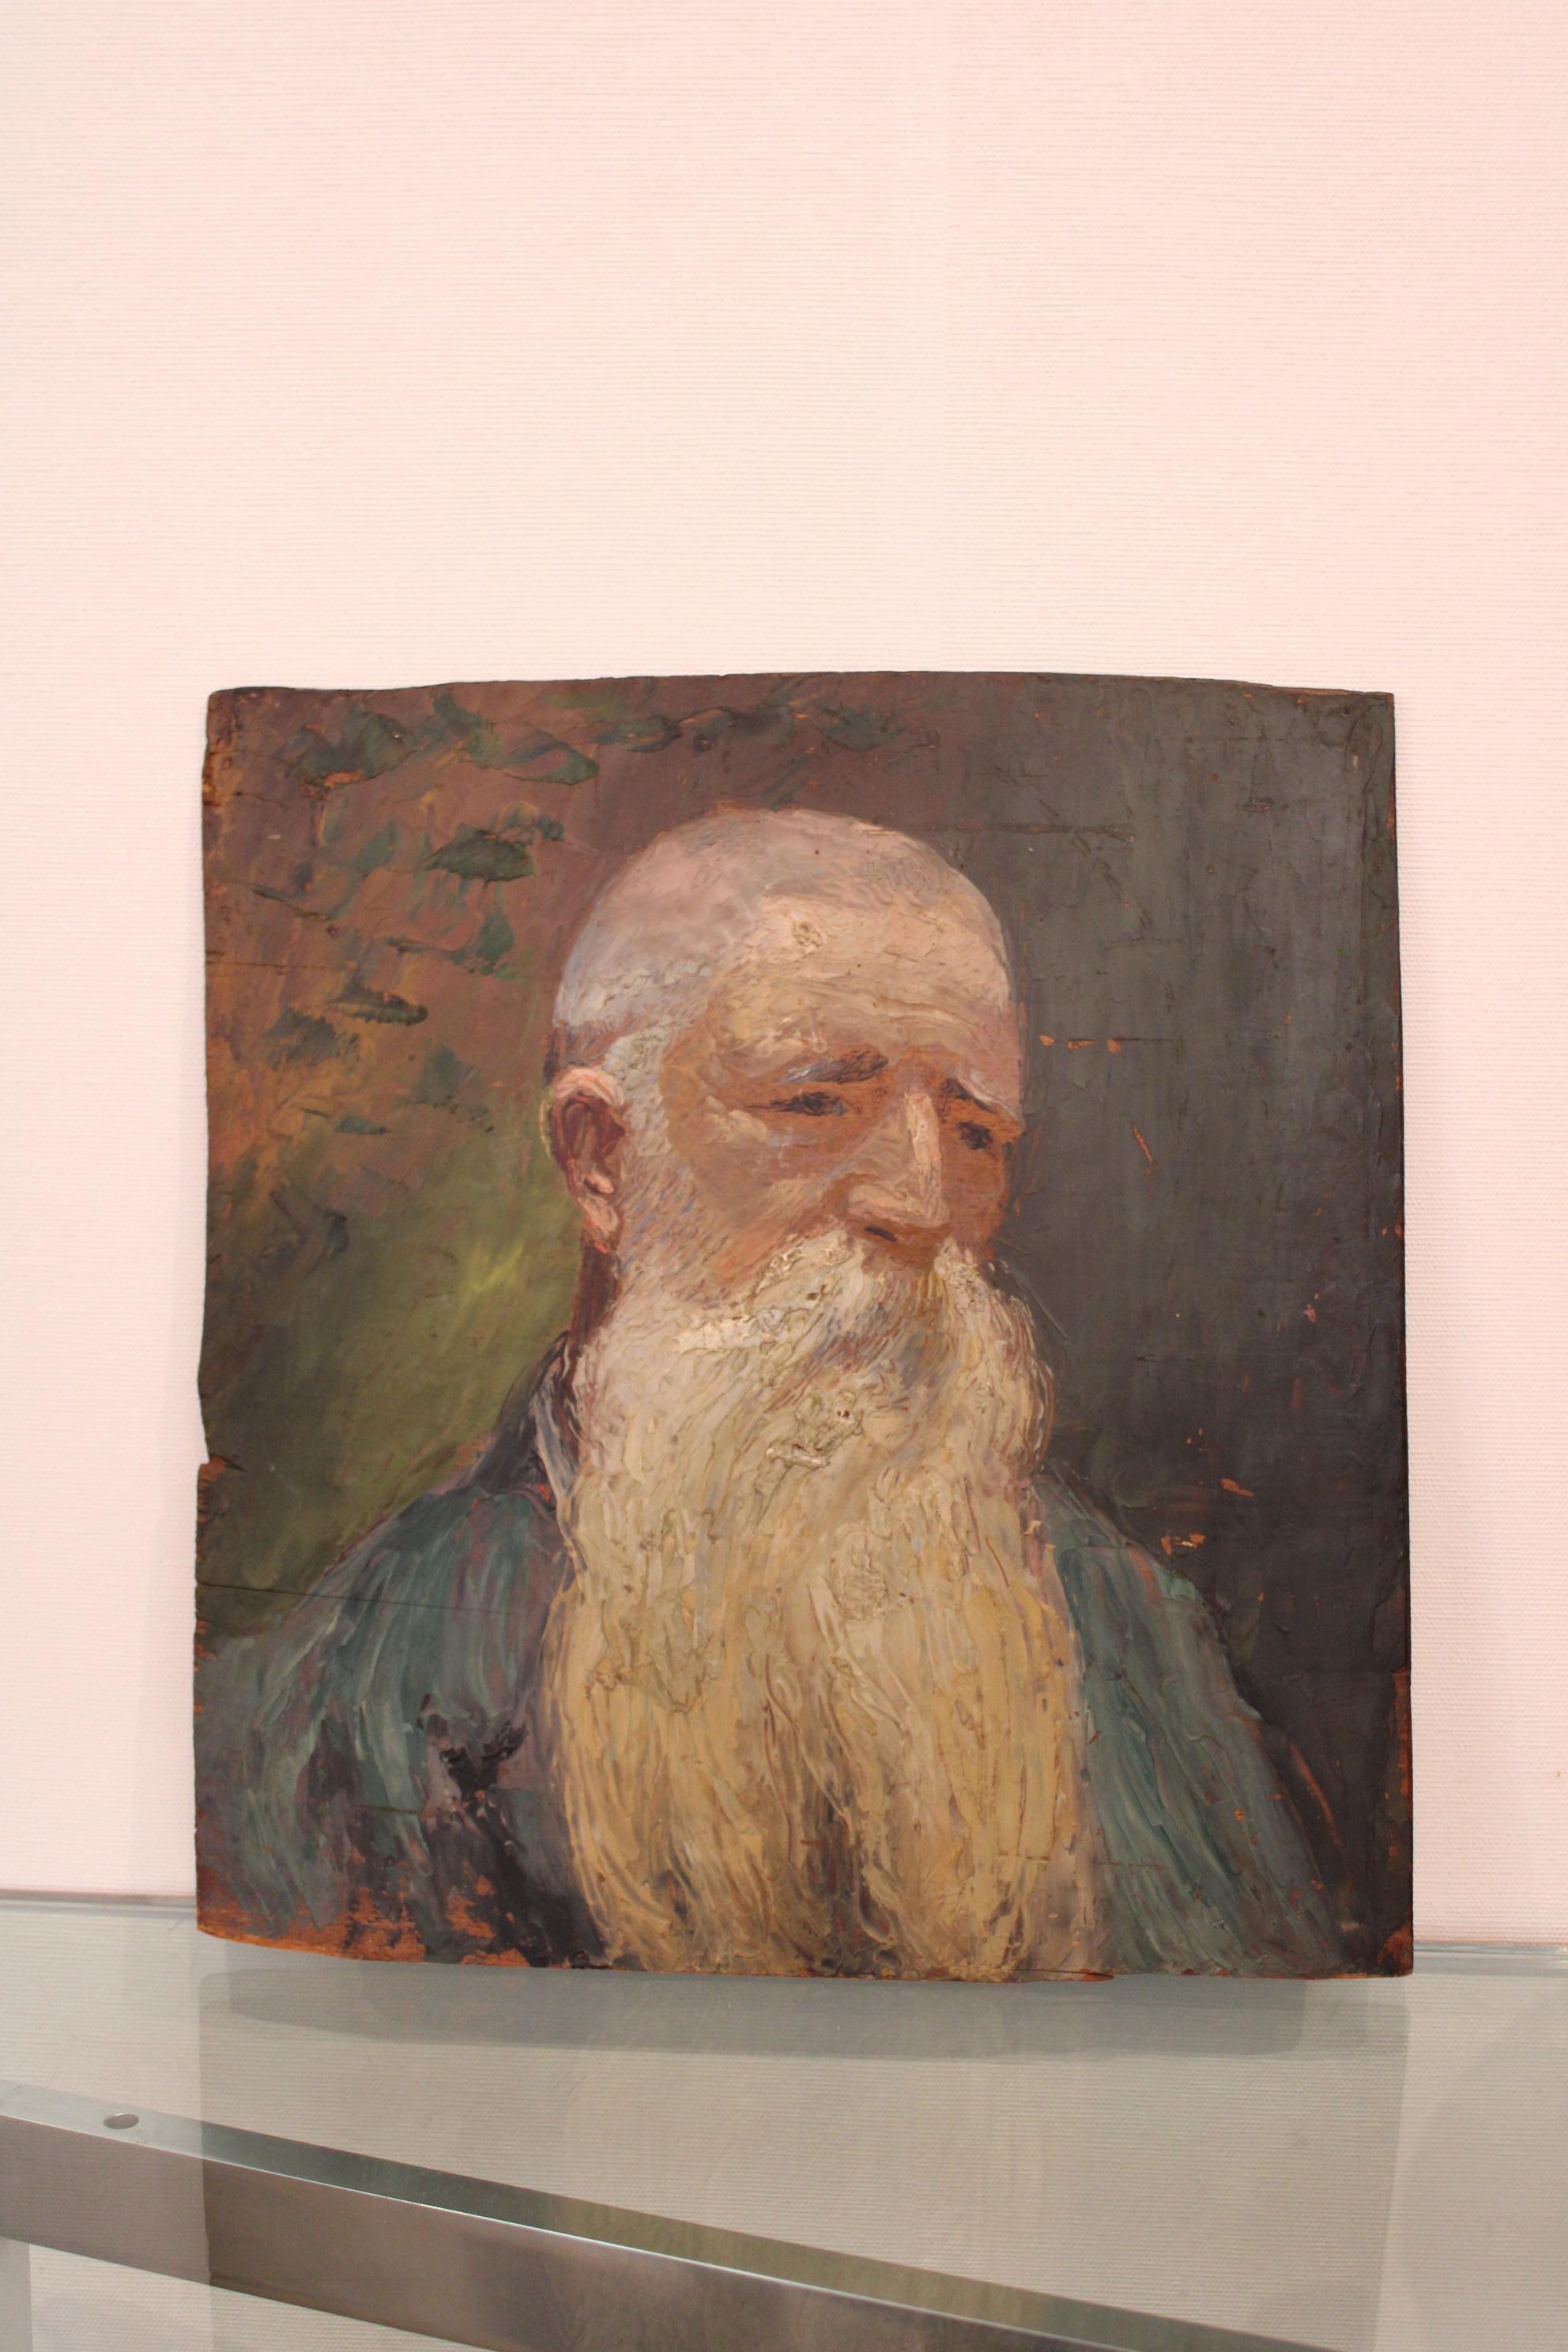 Study portrait of a man by the Polish artist Albert Weinbaum (1880 - 1943).
Oil on panel
Second portrait study on the back of the panel
Signed A.Weinbaum on the back

Some lack on the painting (see photos details).